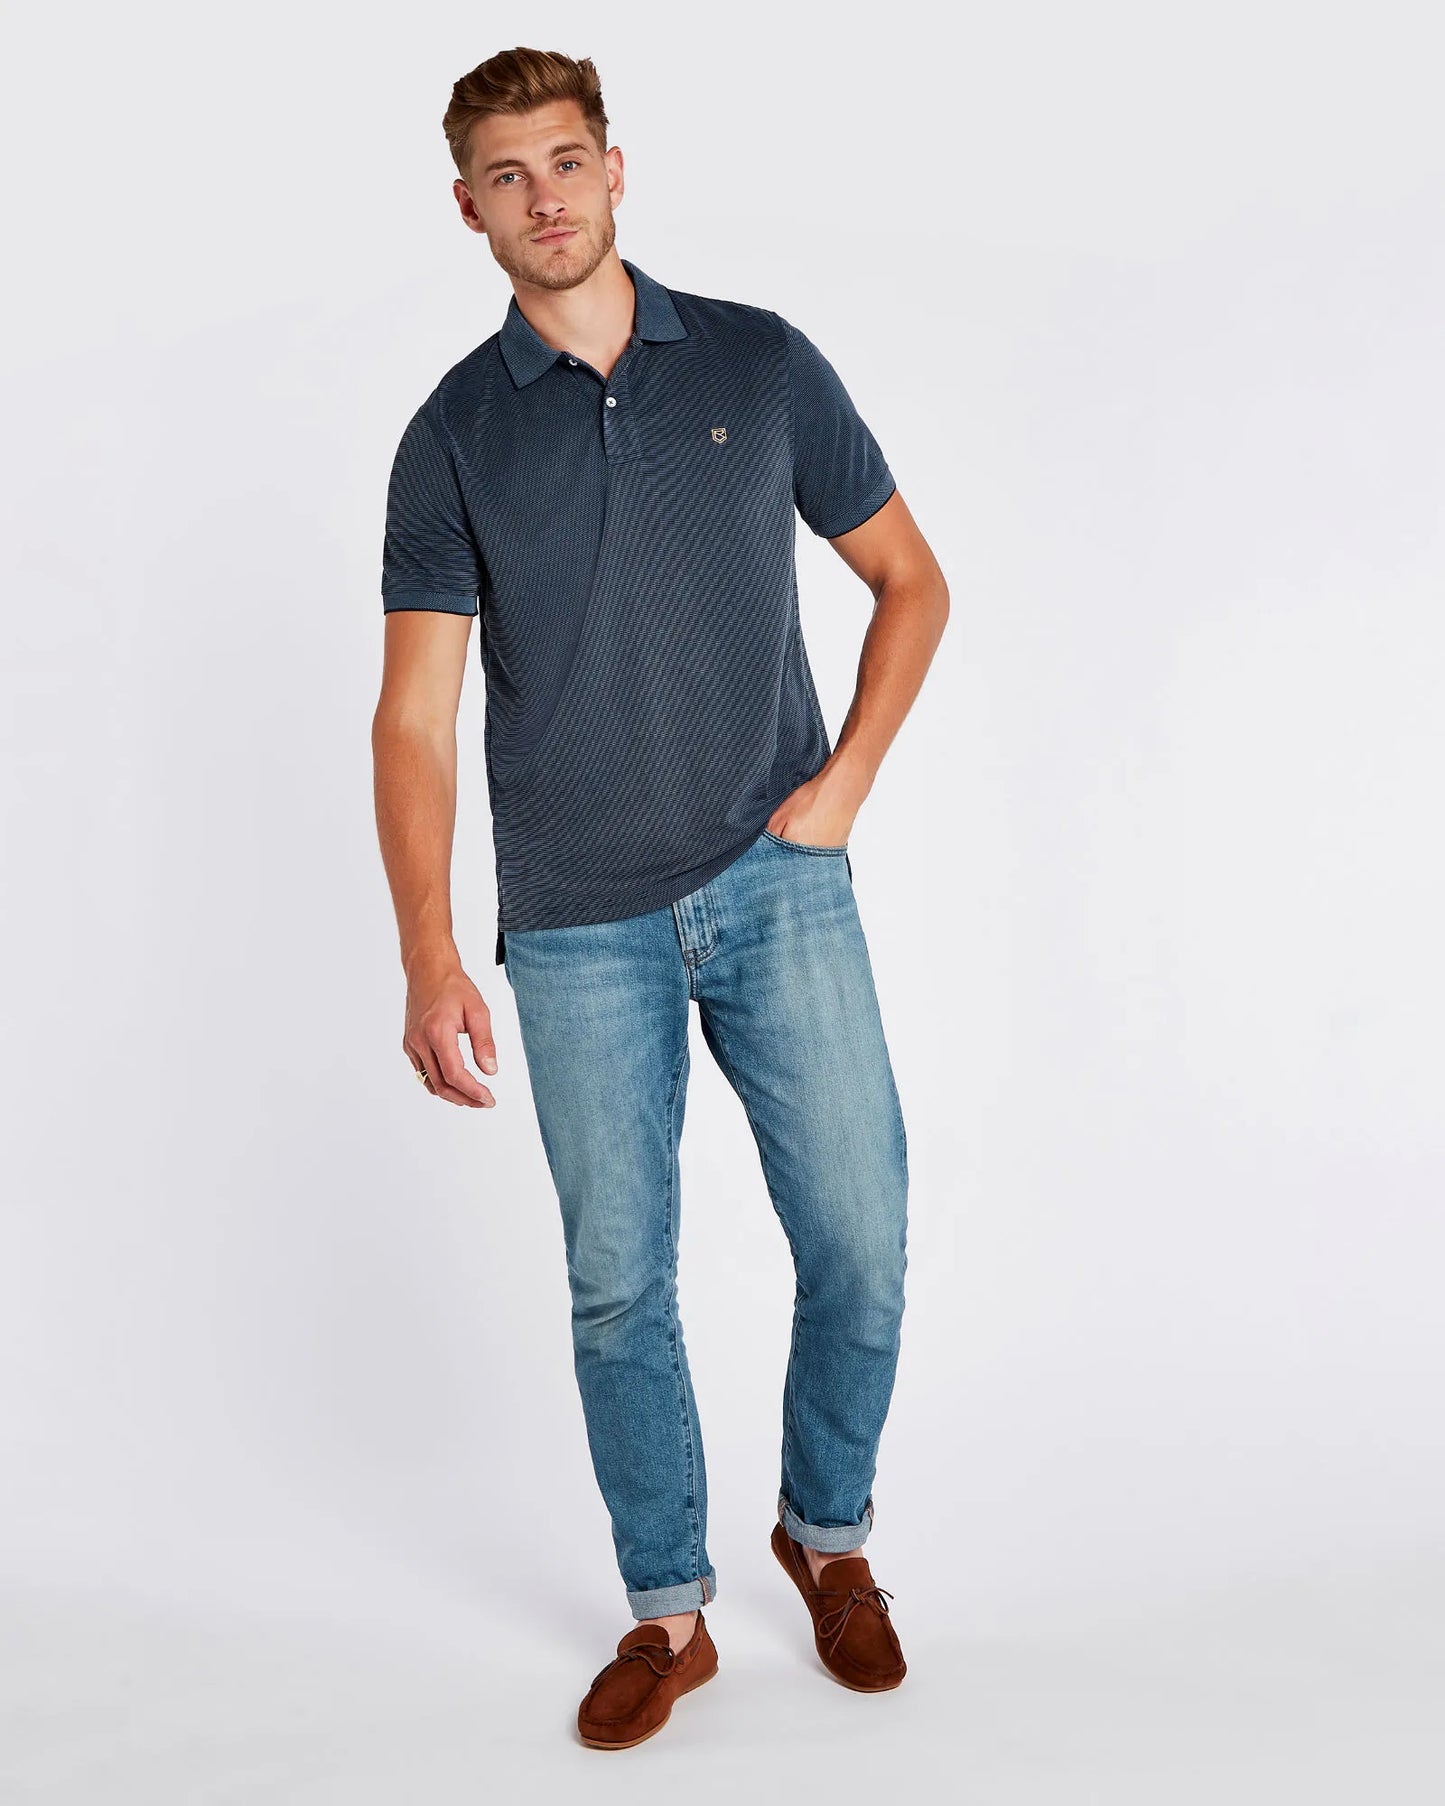 Mullaghmore Polo - Steel